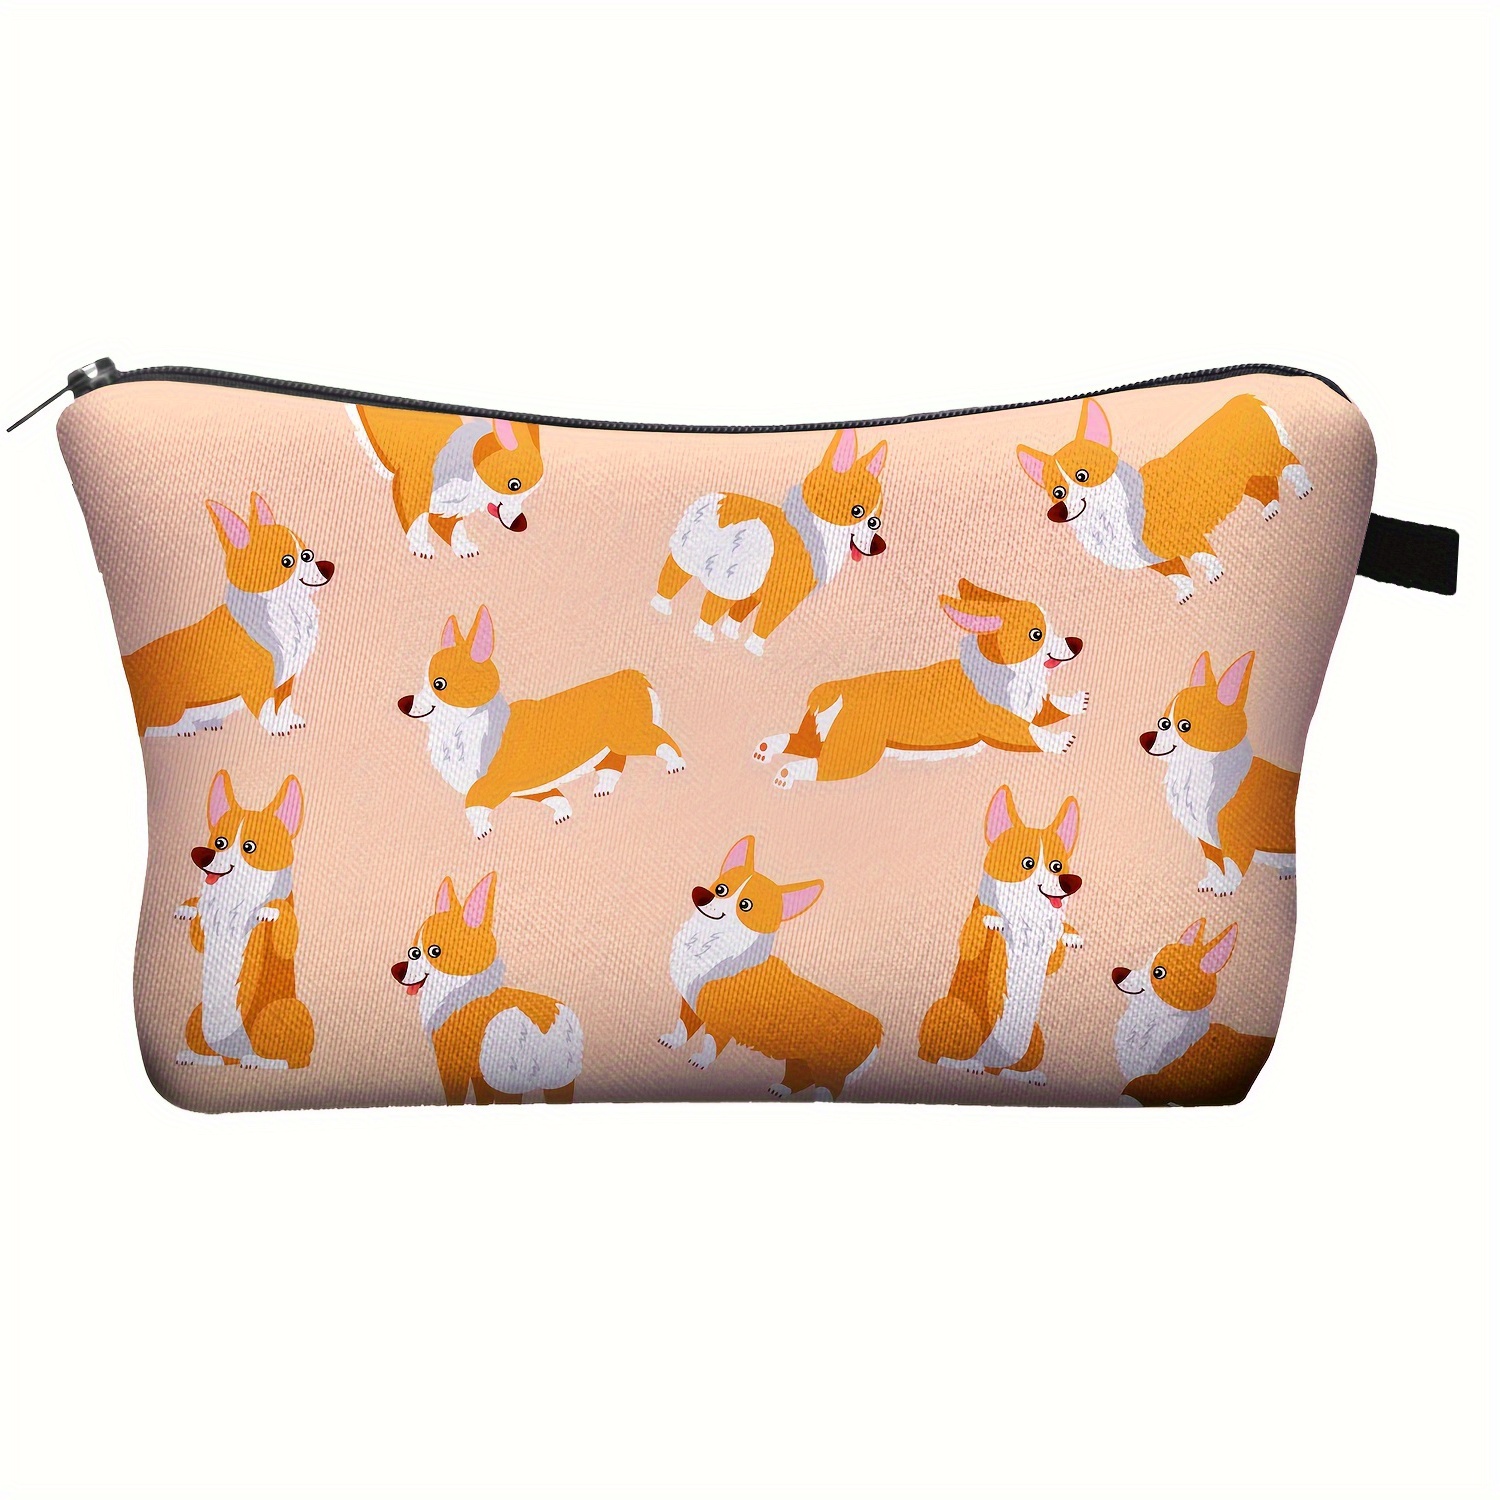 ZJBLHEQ Corgi Dog Face Small Pen Case Cute Organizer Stationery Large Capacity Makeup Bag with Zipper Pouch Holder Box for Office Travel Gift